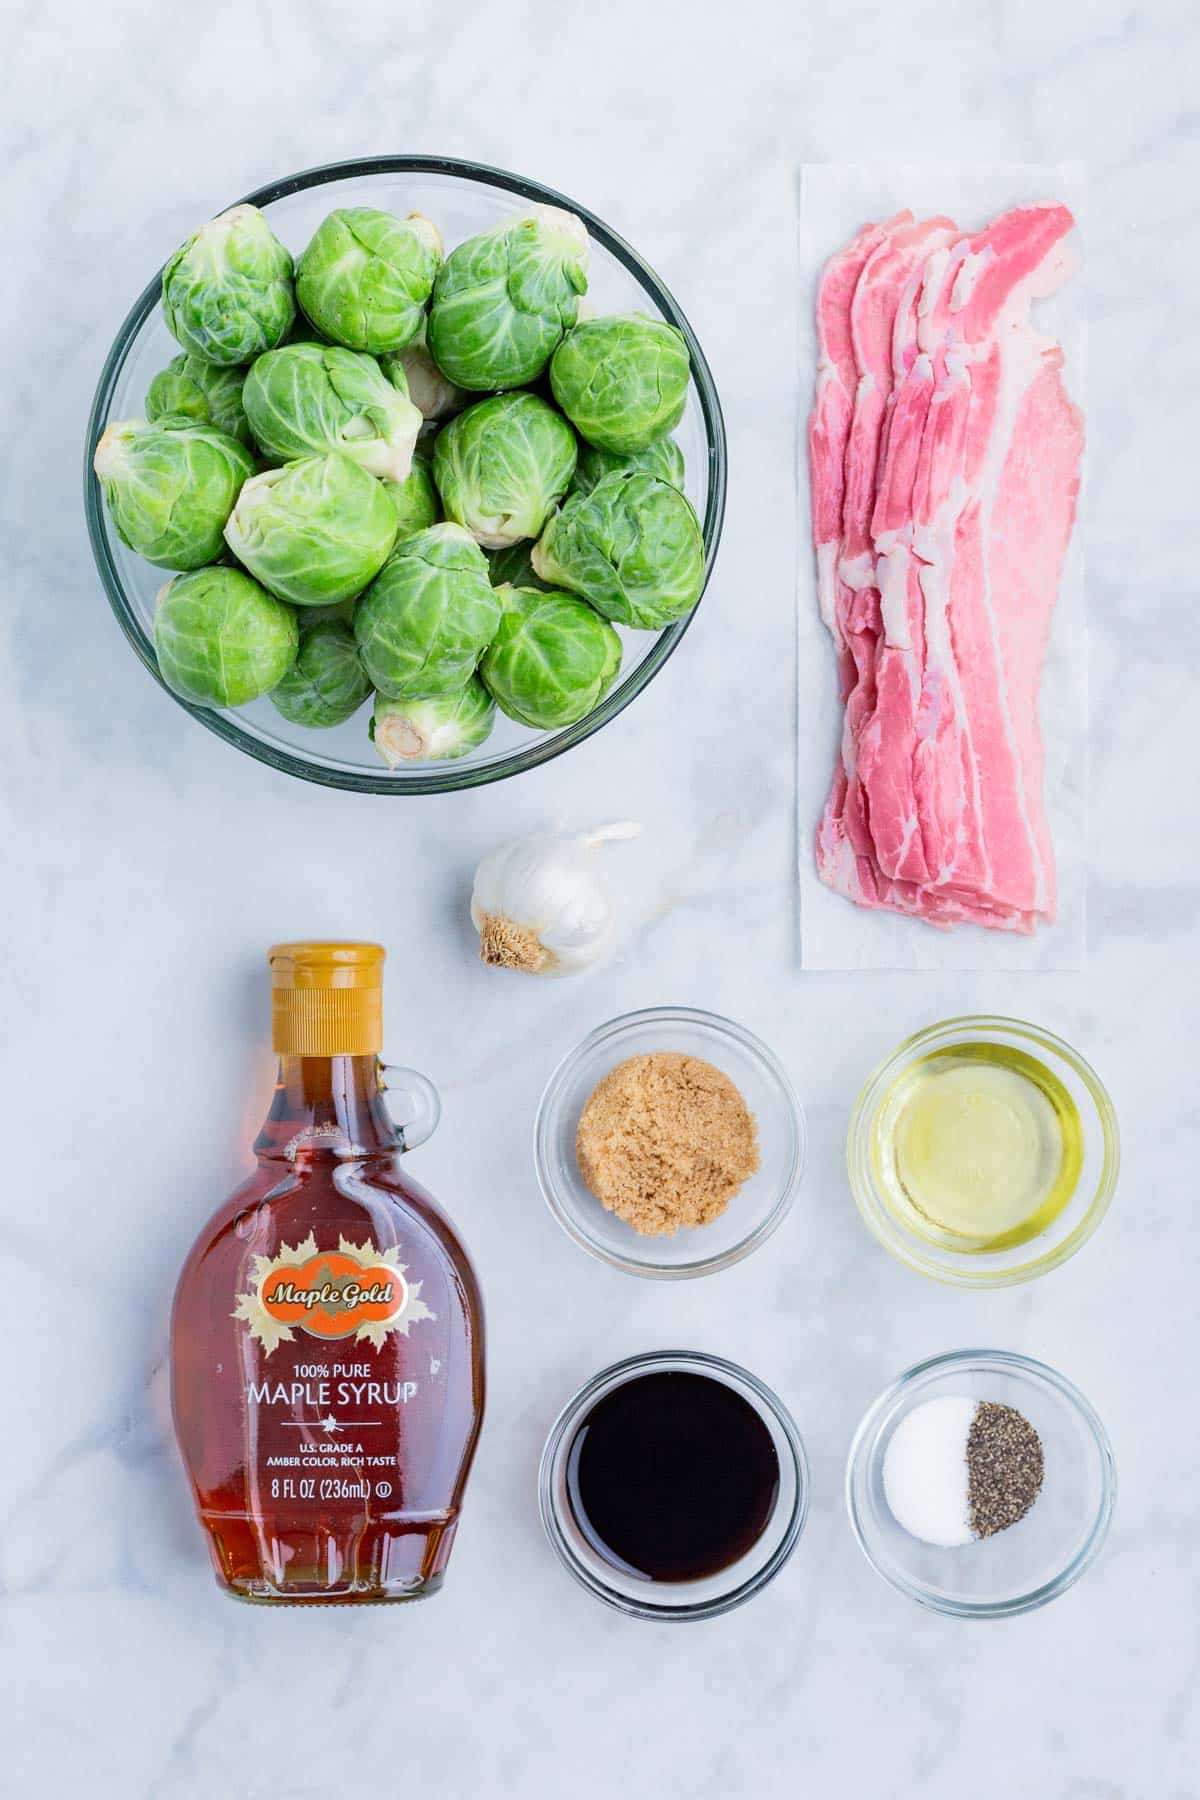 Brussels sprouts, bacon, brown sugar, maple syrup, balsamic vinegar, and seasonings are the ingredients for this dish.